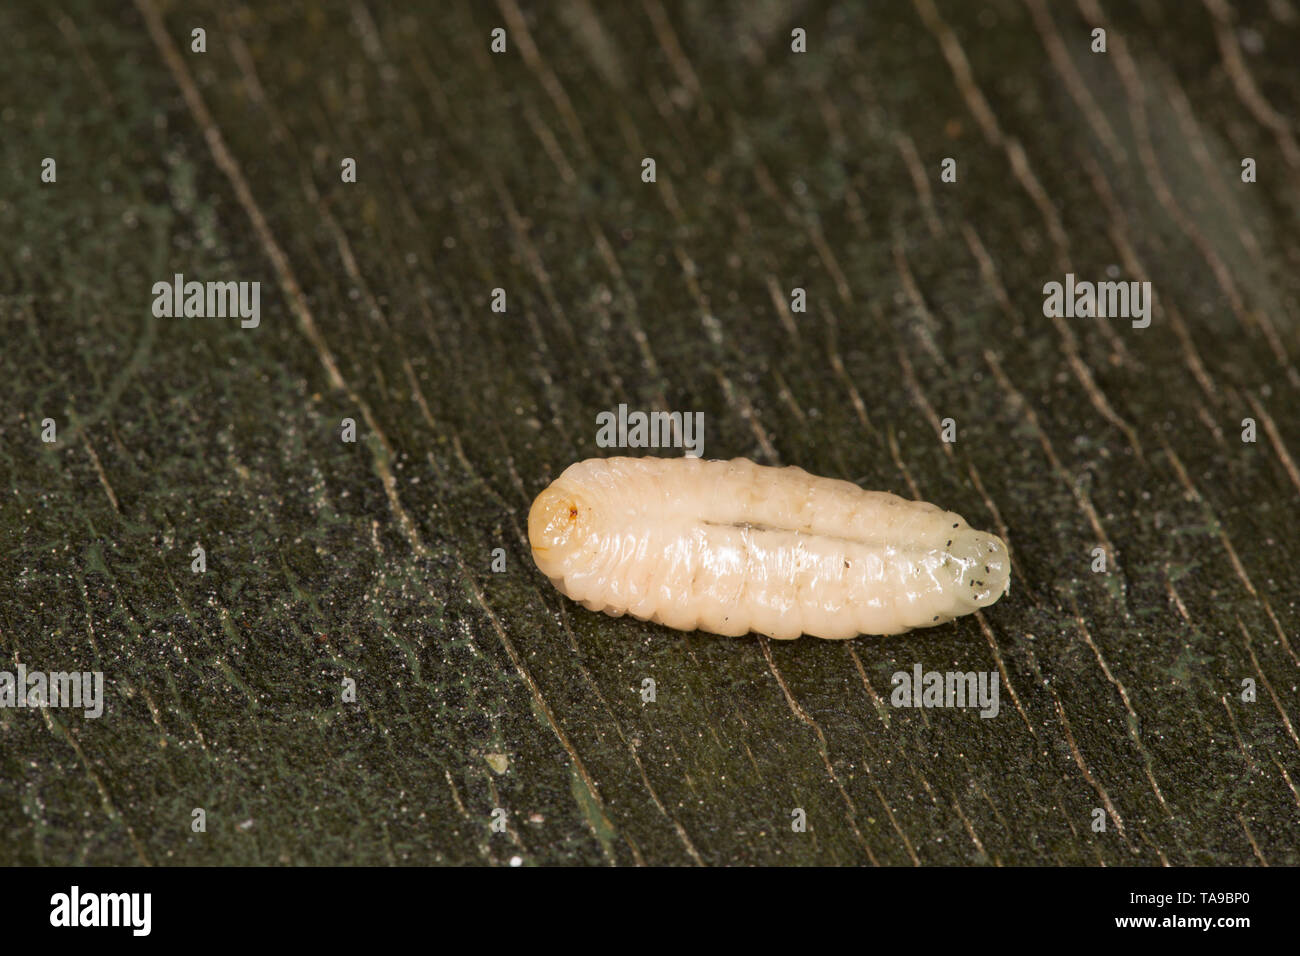 A wasp grub from a nest that was found in a woodpile when moving logs in a garden. Lancashire England UK GB Stock Photo